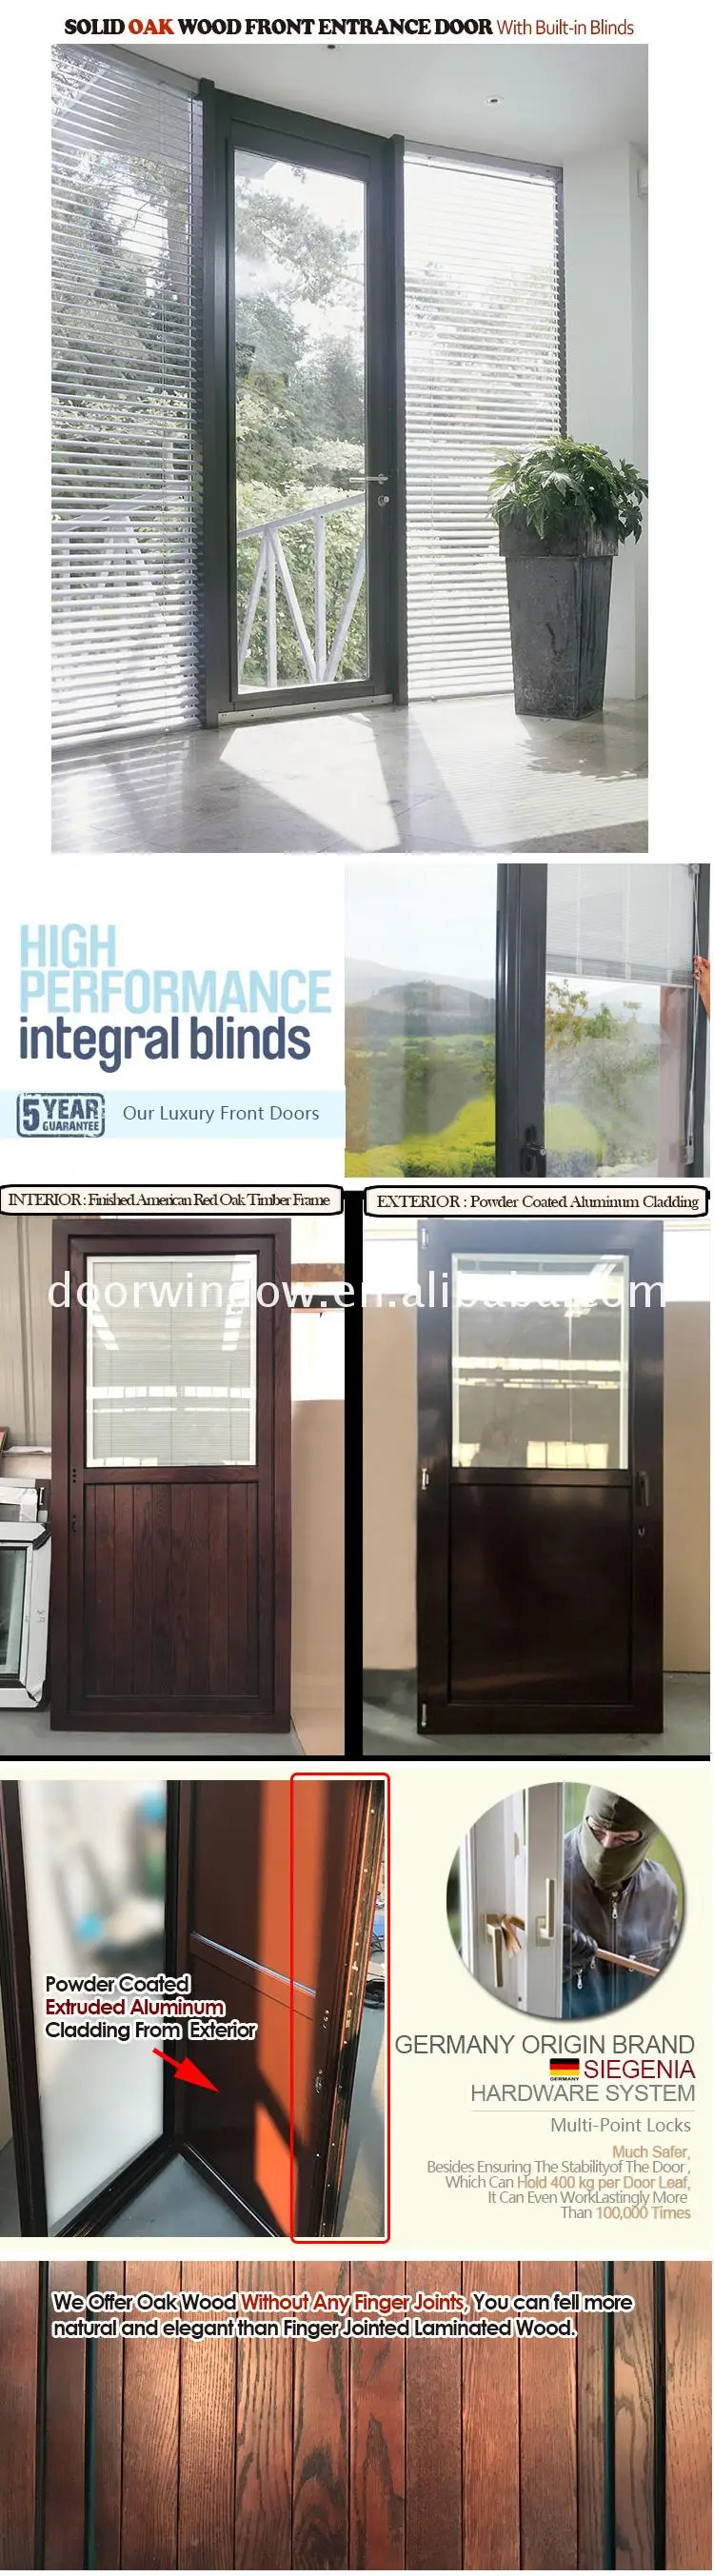 Hot new products wood aluminum composite frame front entrance security door